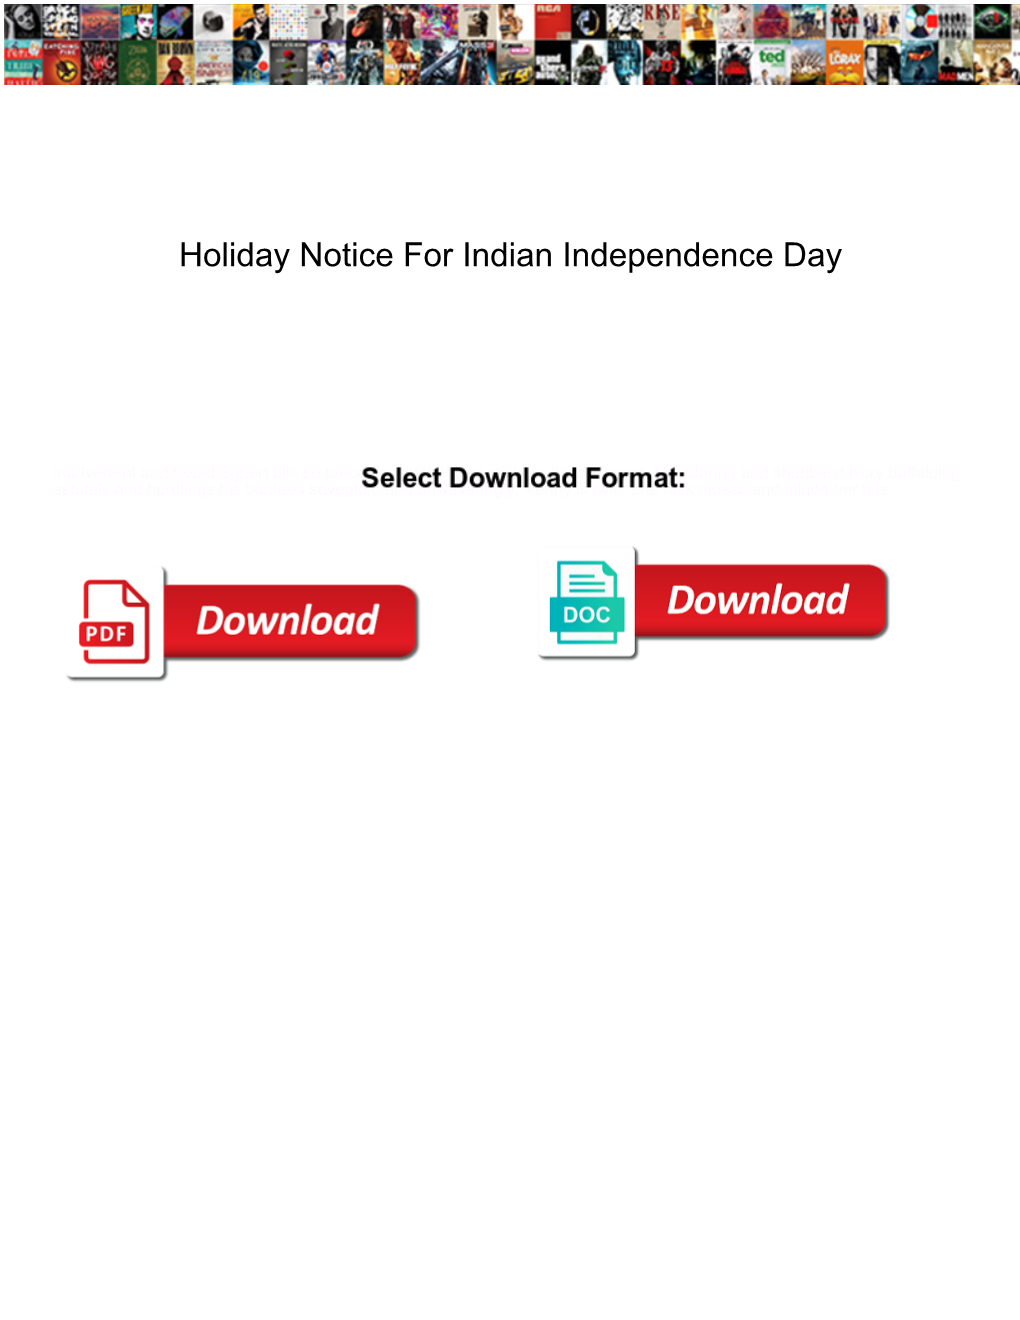 Holiday Notice for Indian Independence Day